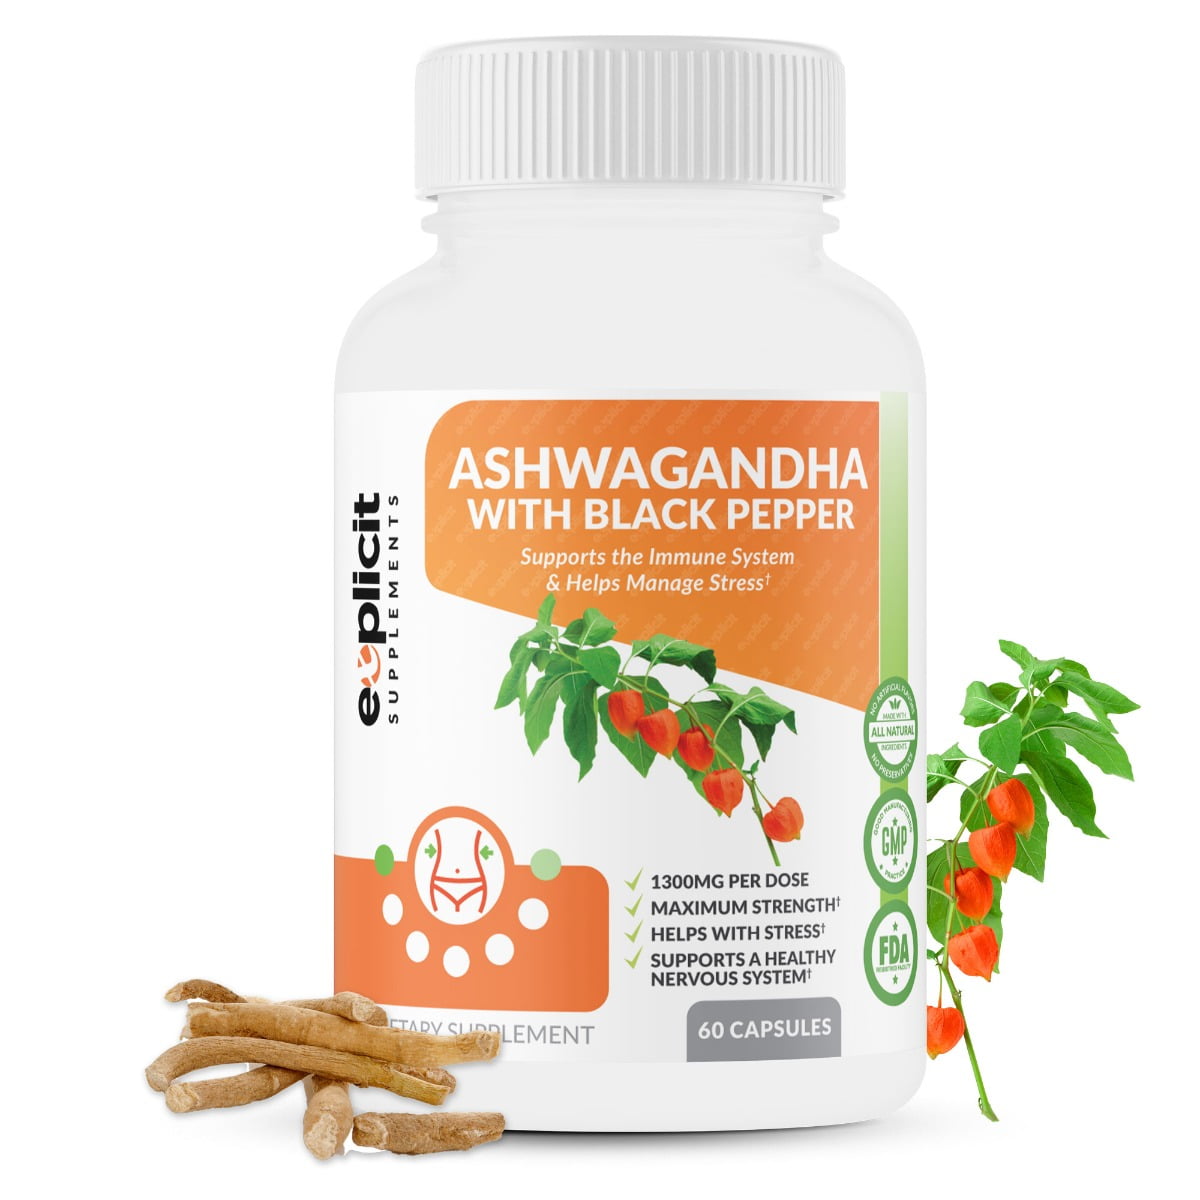 is ashwagandha better with black pepper